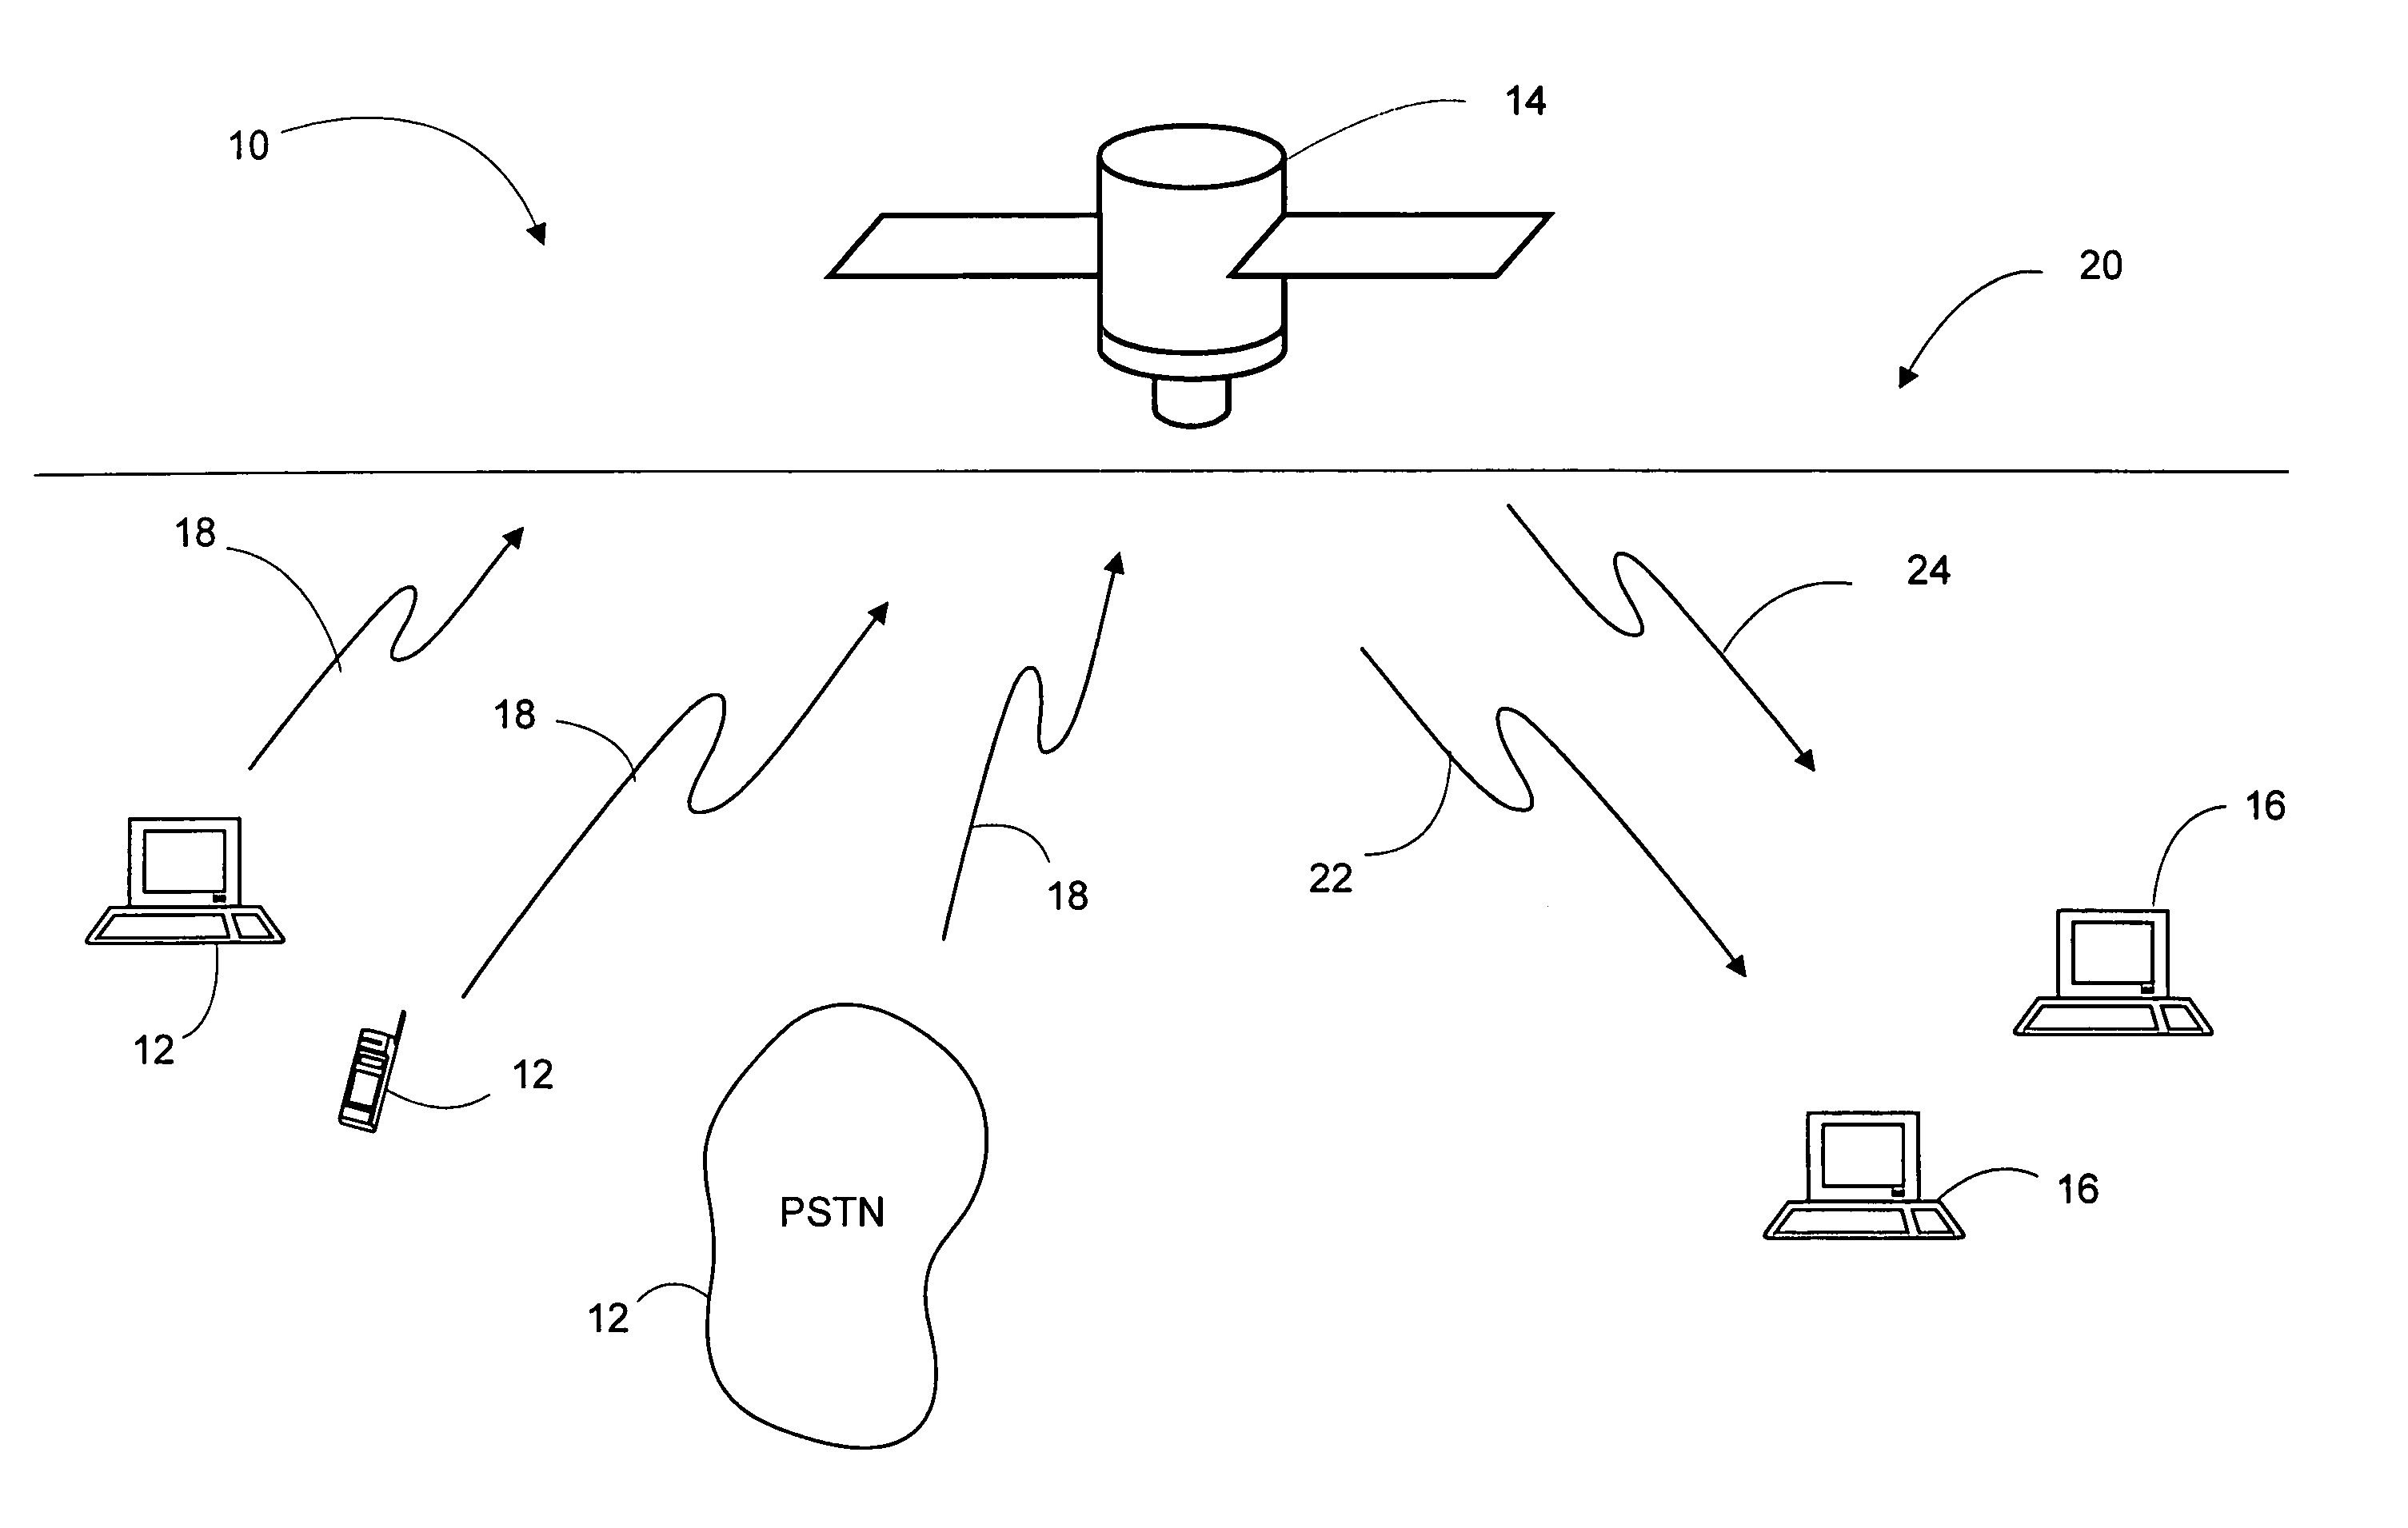 Broadband communication system using point and shoot approach